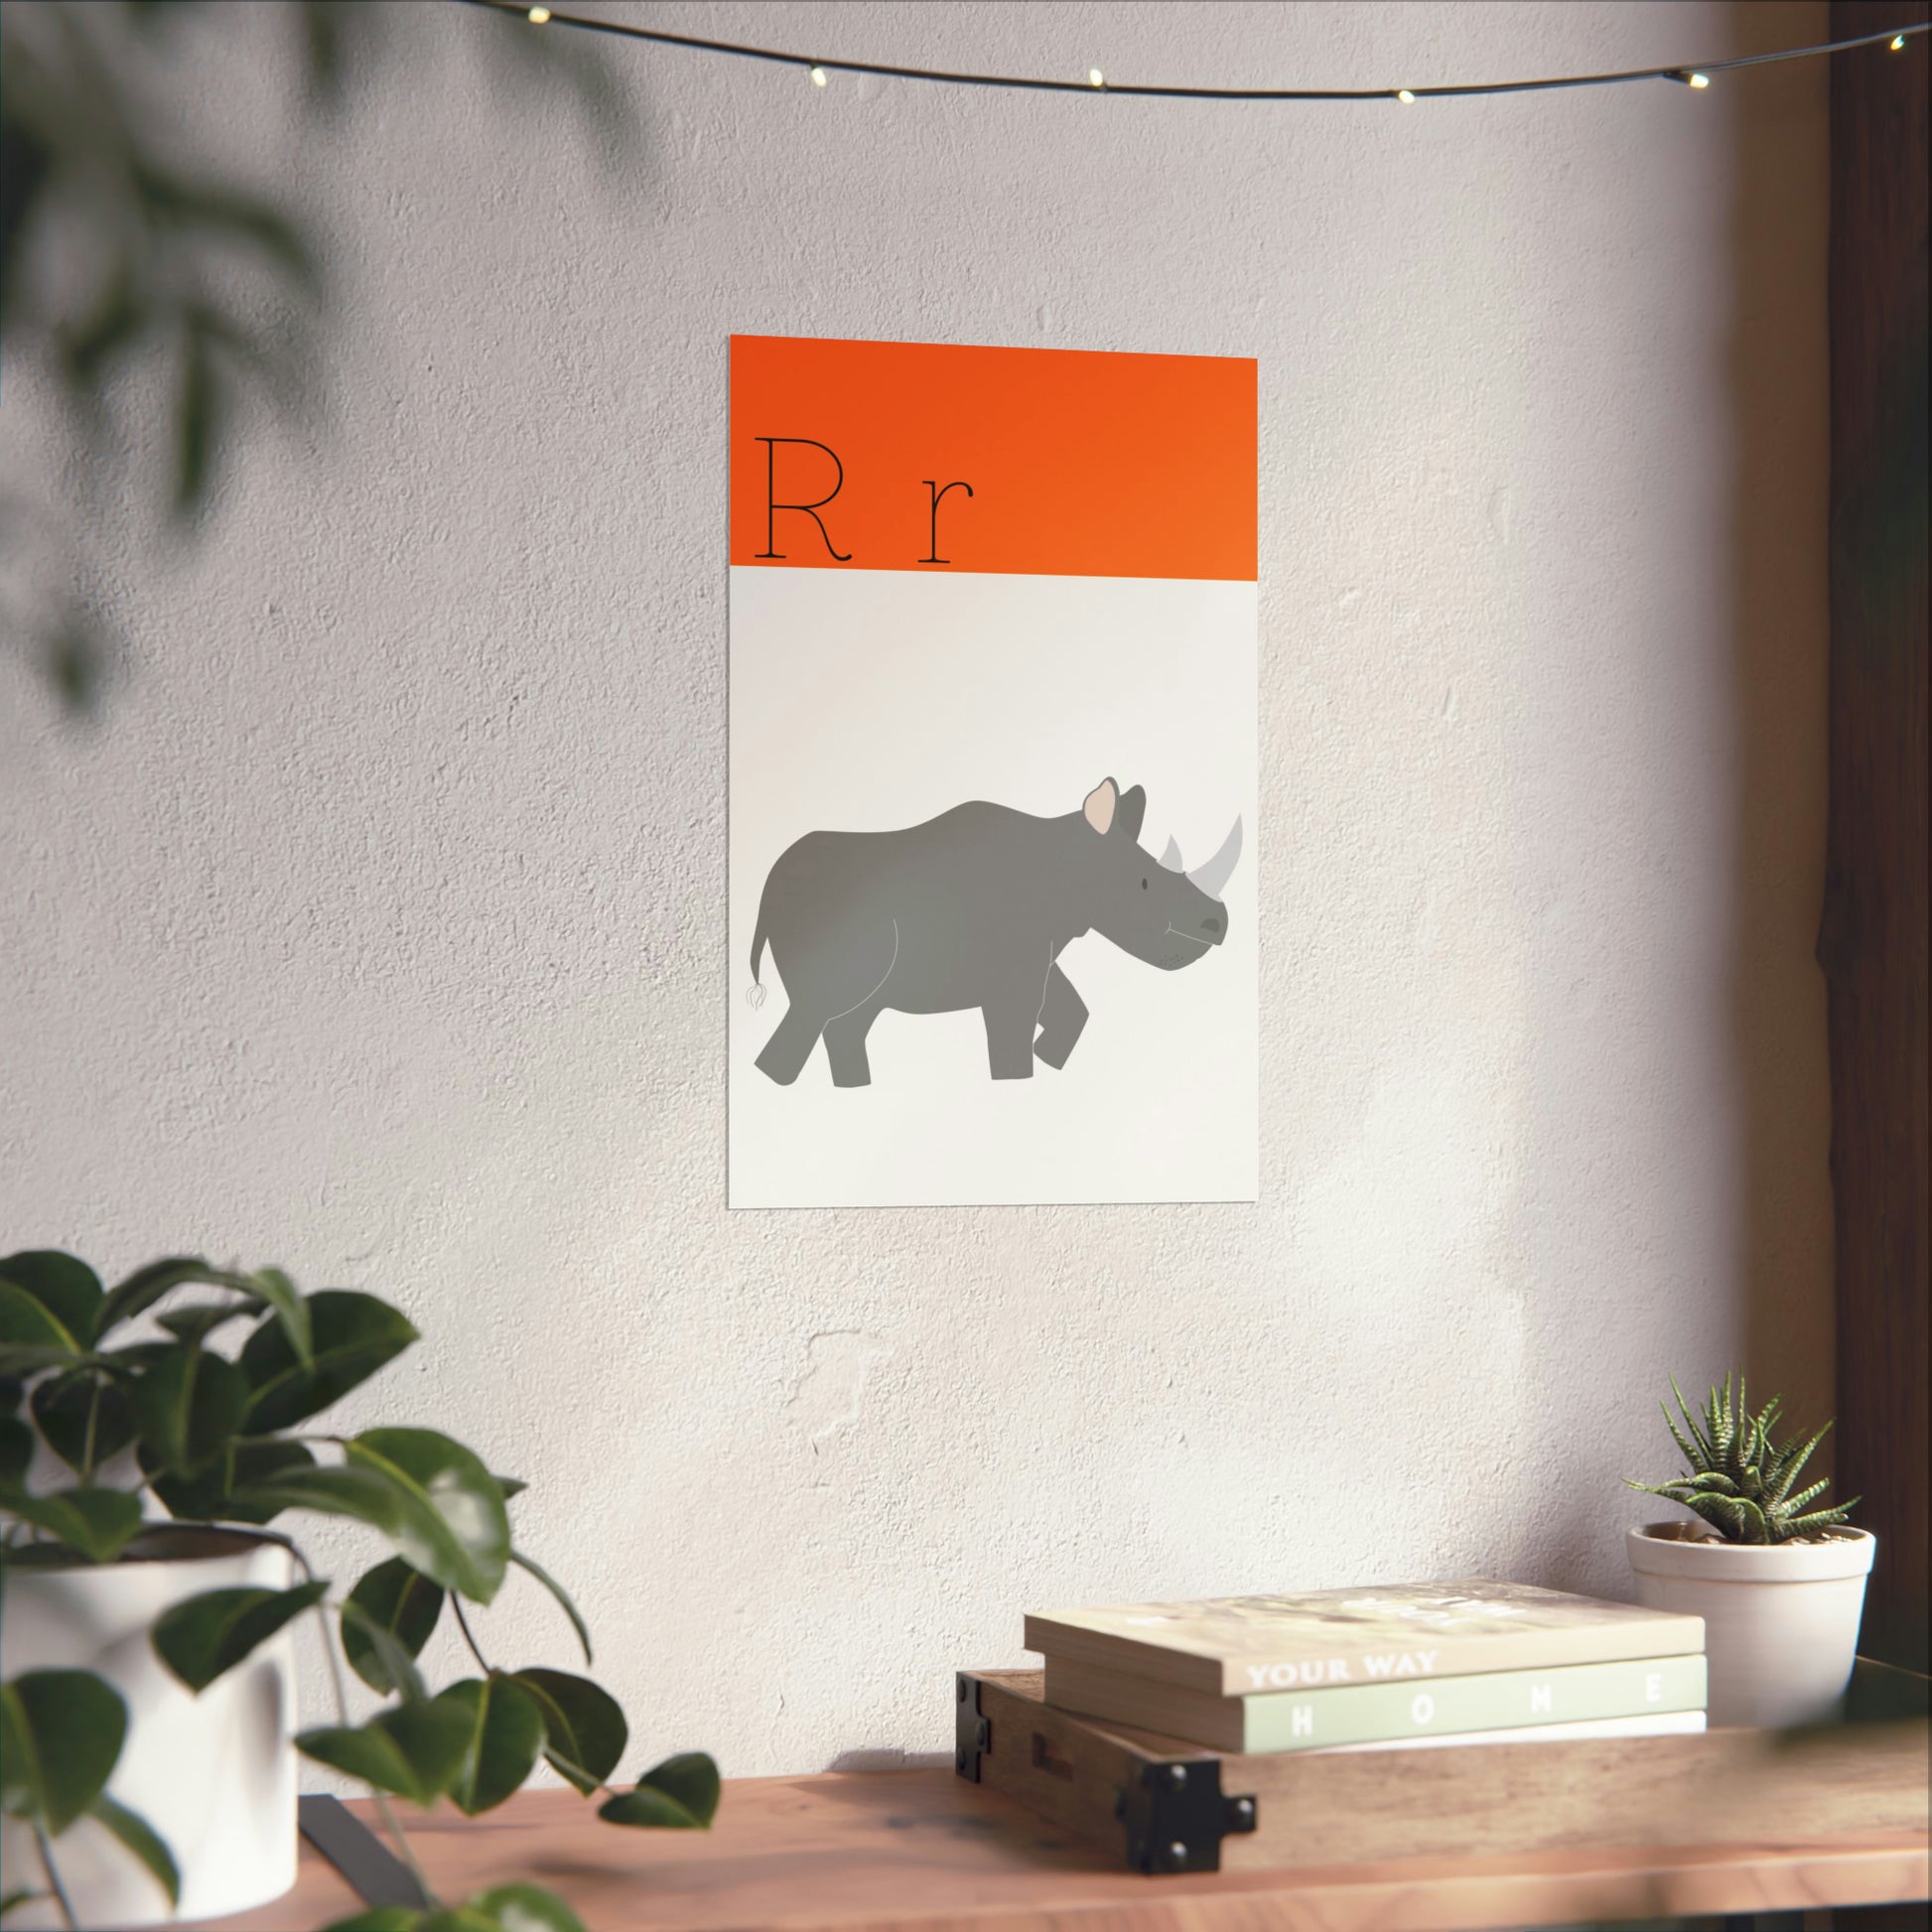 Rhino Poster On White Wall with Plants an books